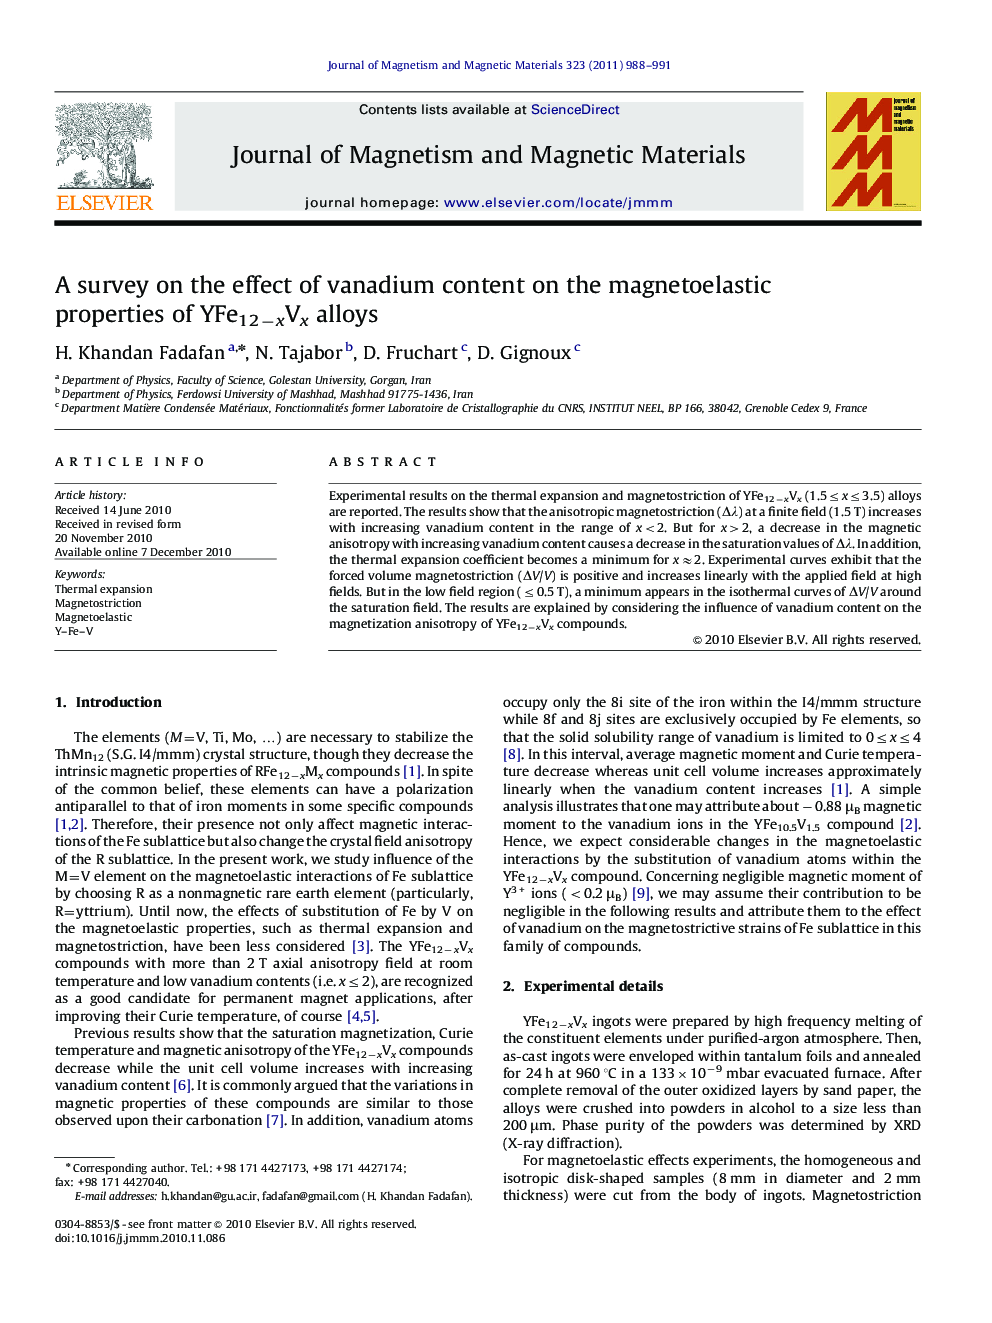 A survey on the effect of vanadium content on the magnetoelastic properties of YFe12âxVx alloys